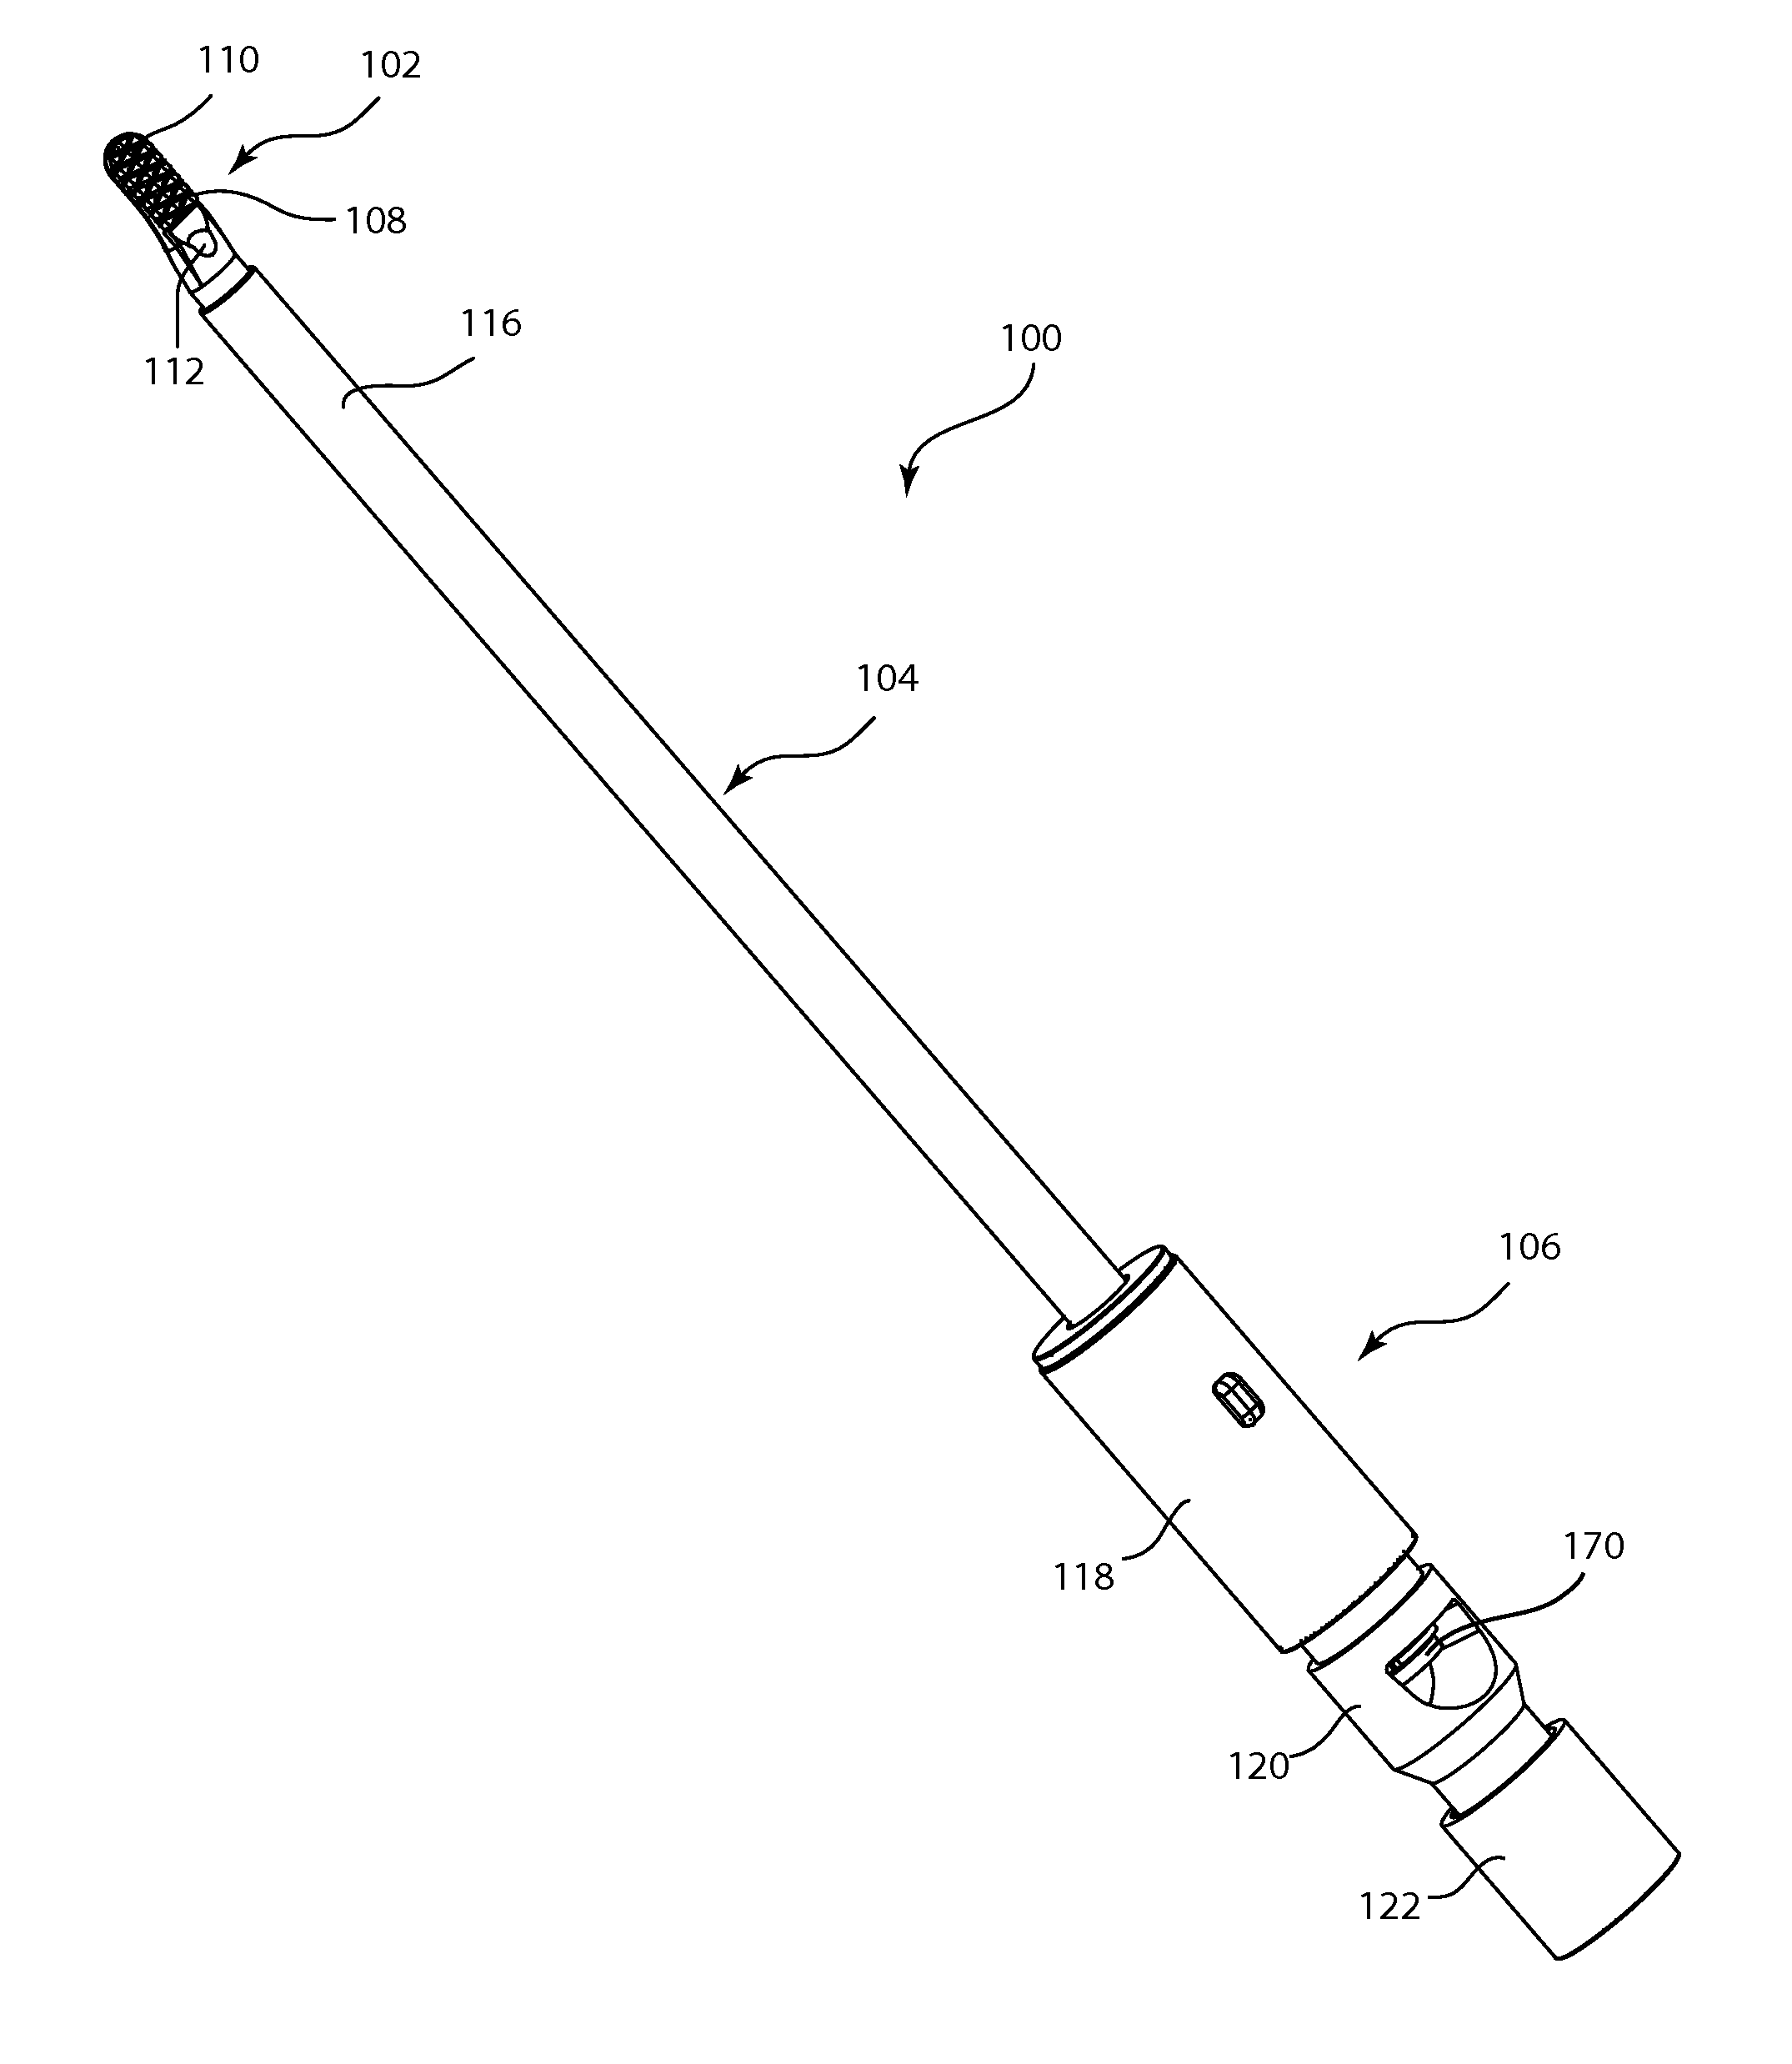 Reciprocating surgical instrument